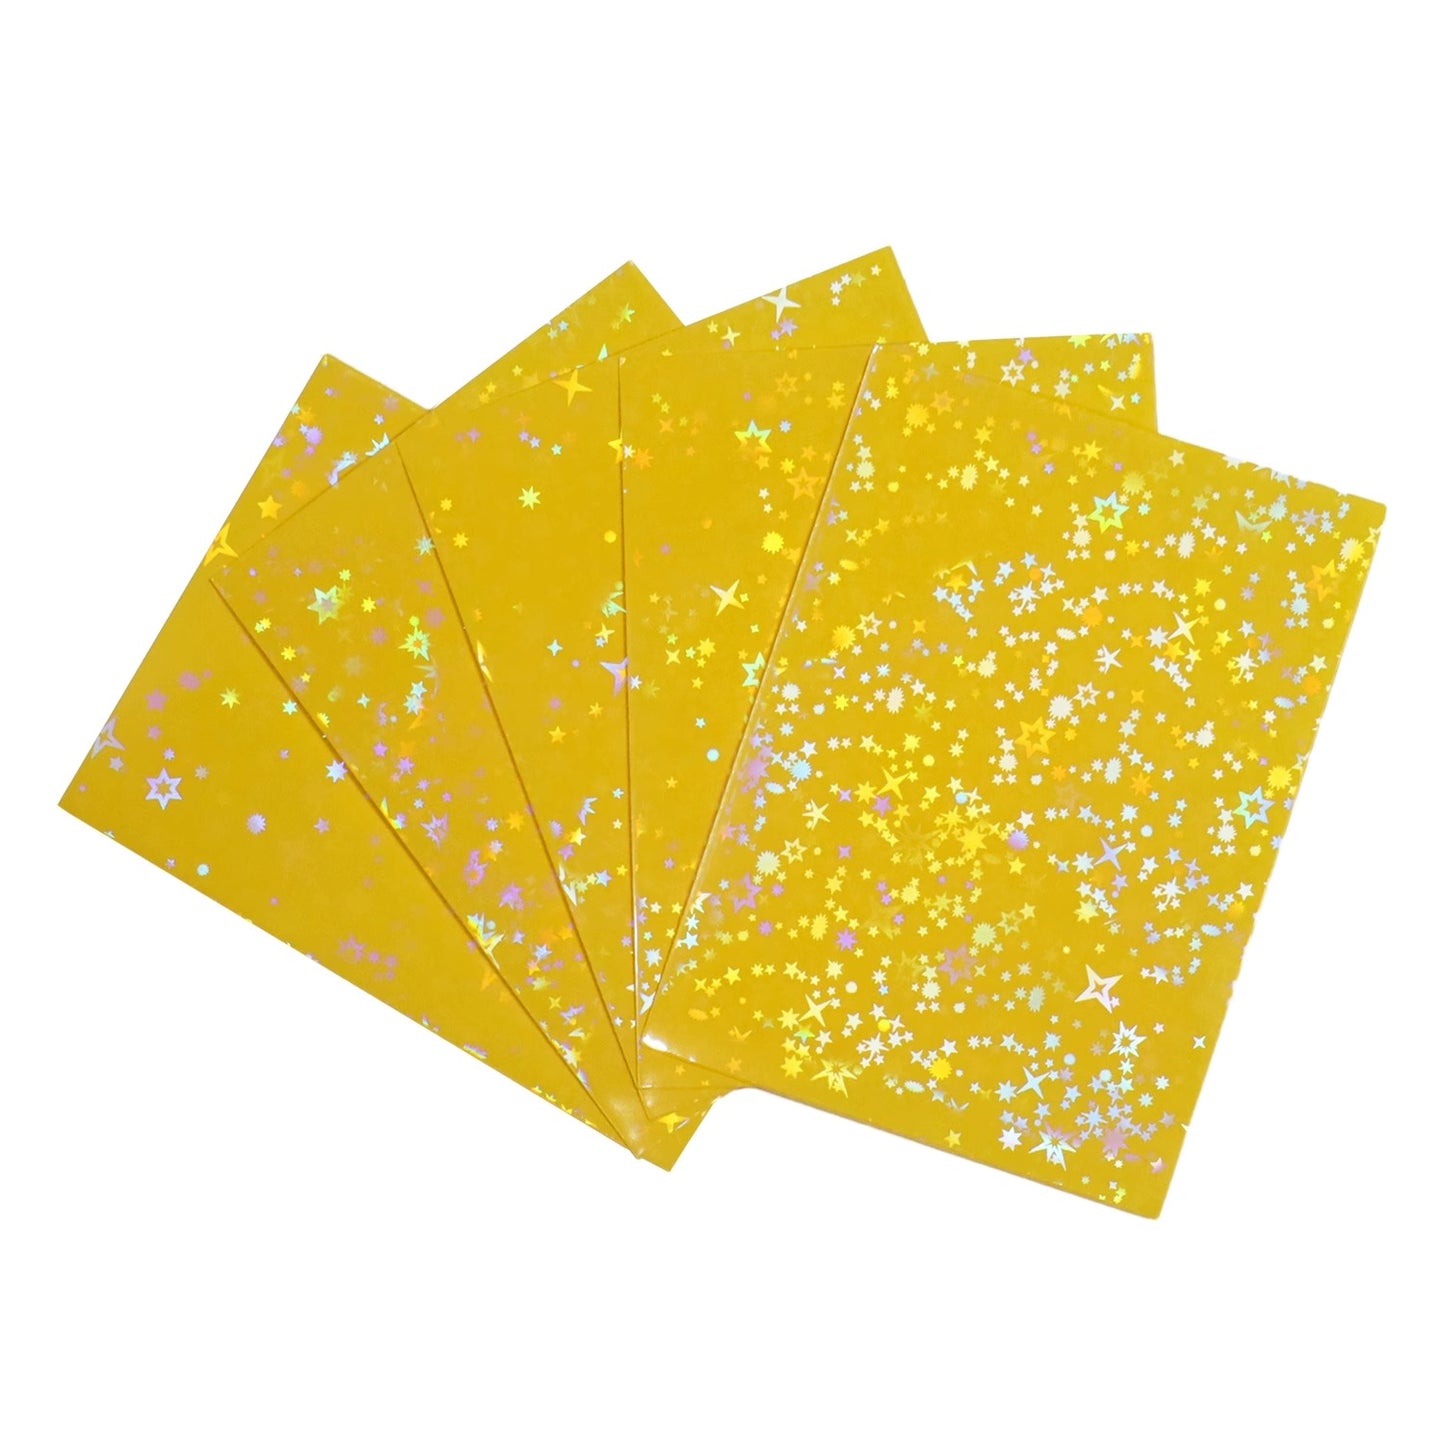 Bling Bling Starz Holographic Standard Size Card Sleeves